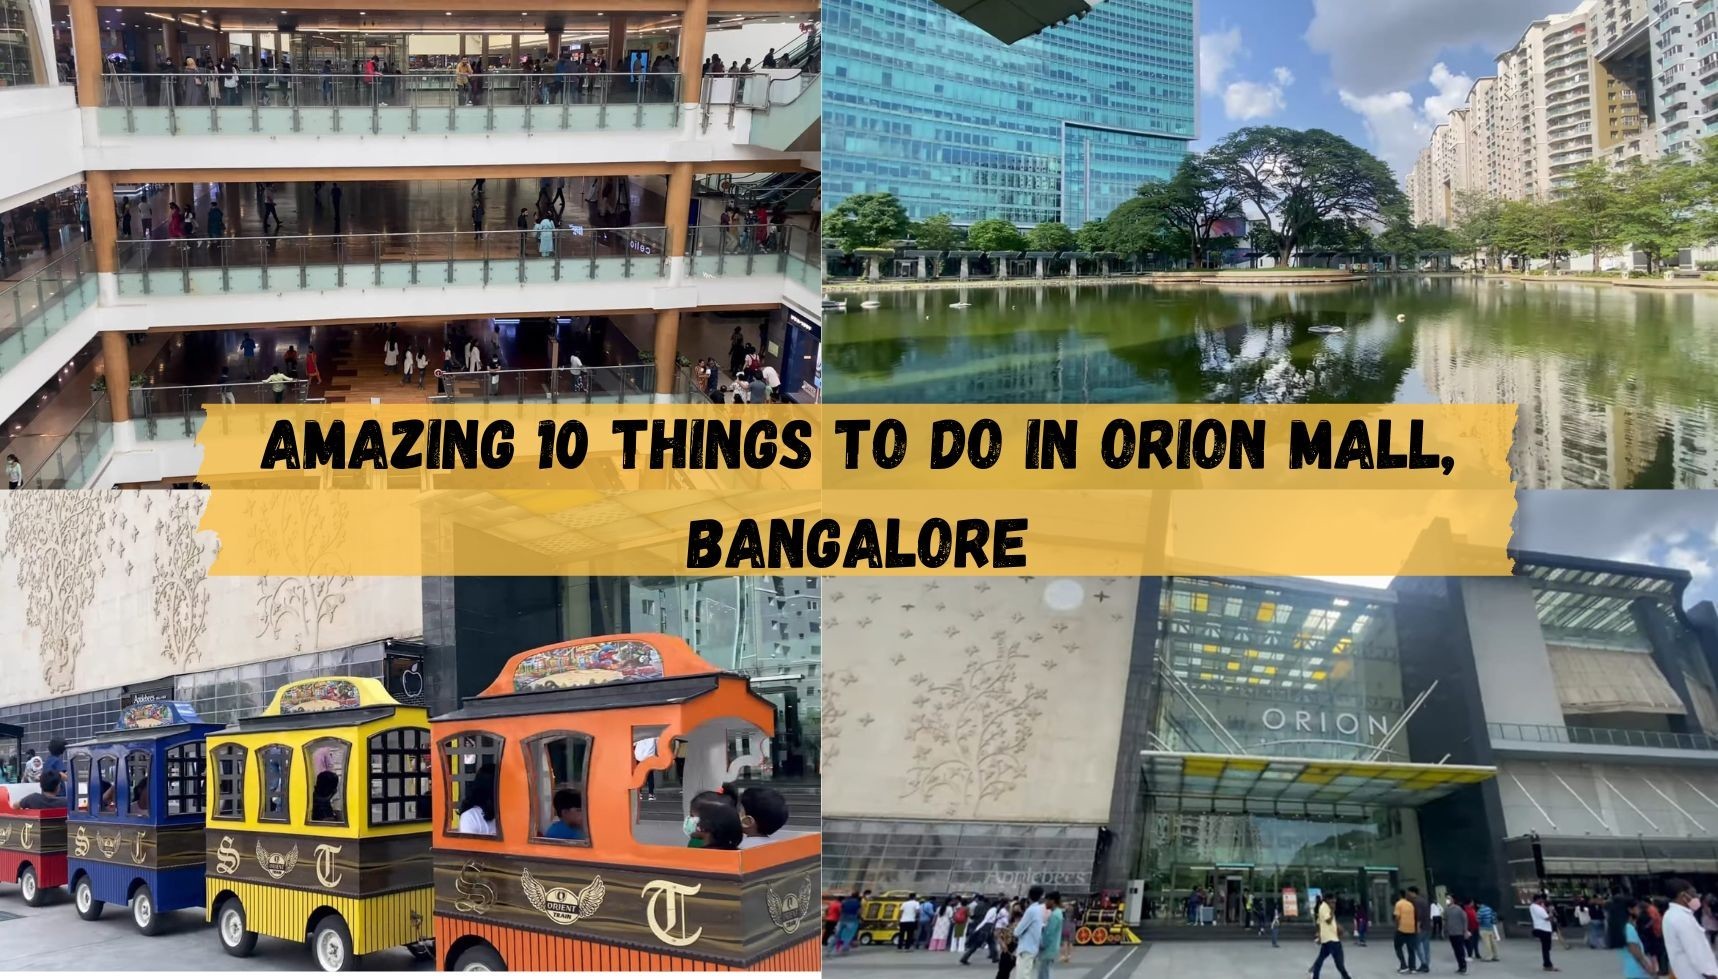 https://tookmehere.com/amazing-10-things-to-do-in-orion-mall-bangalore/